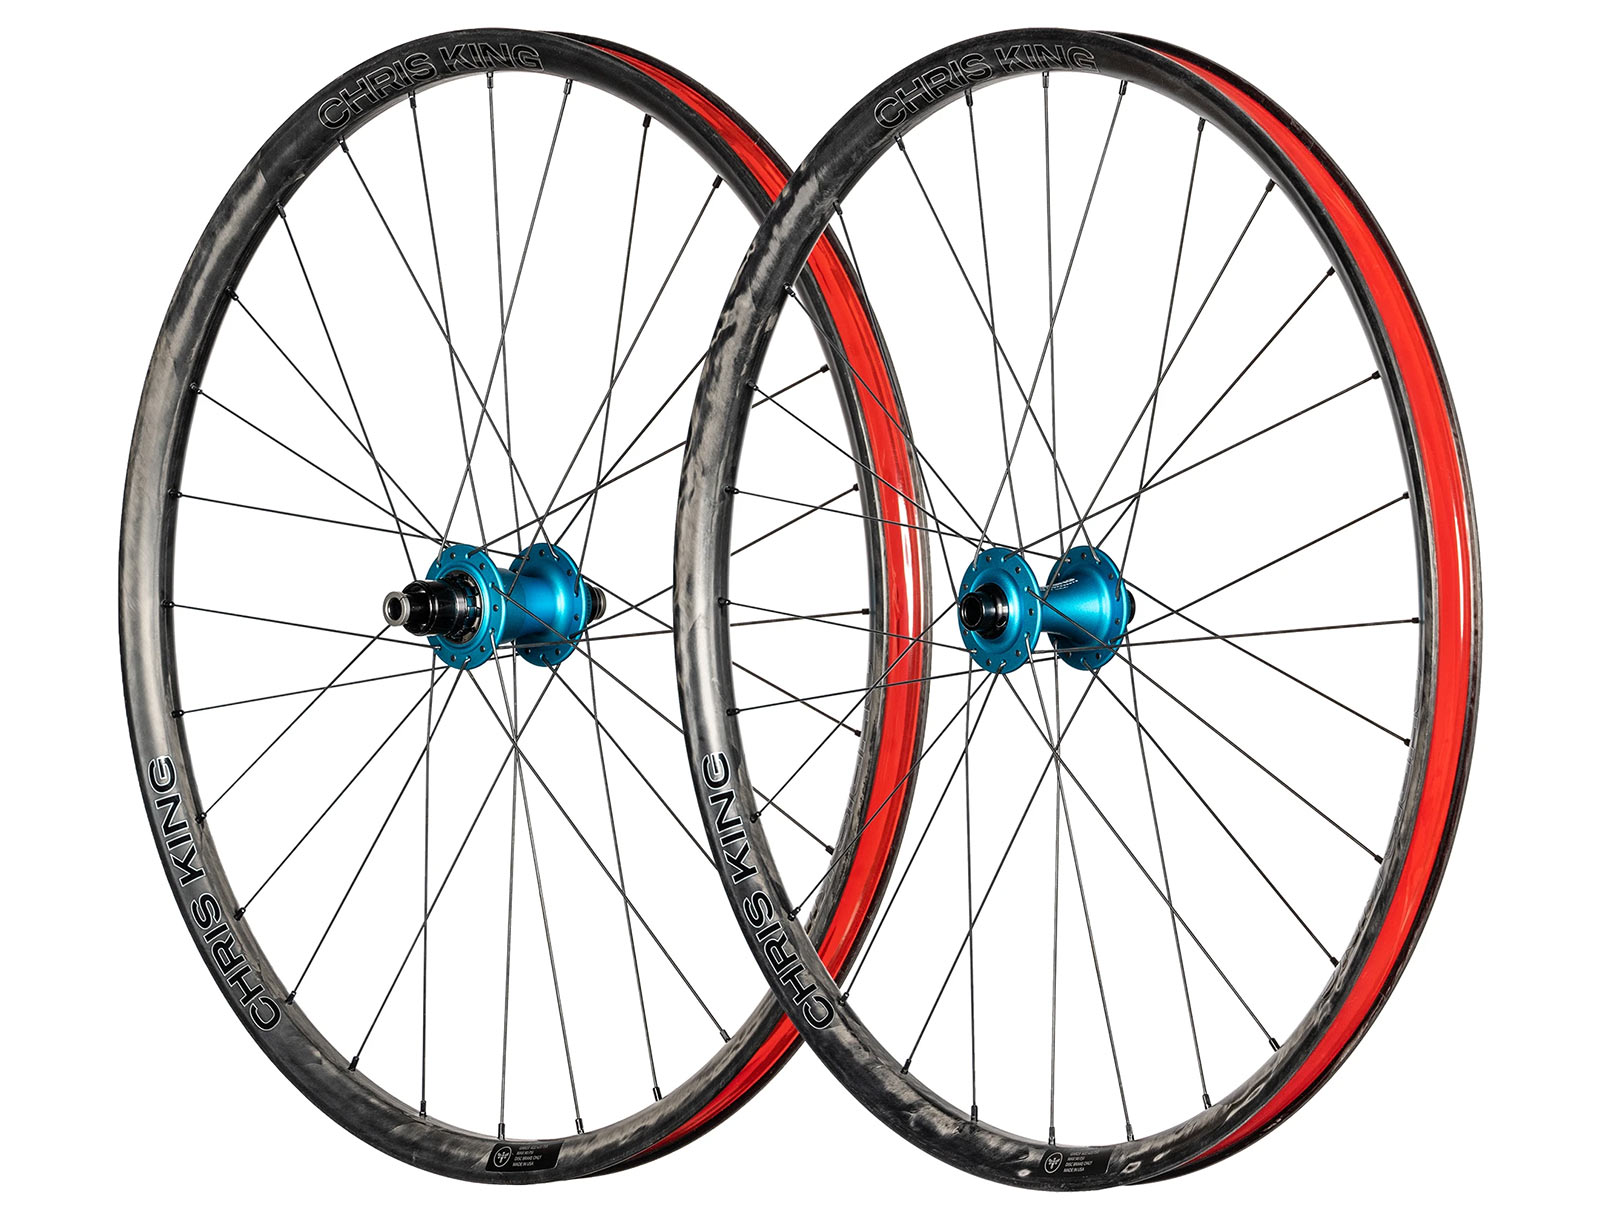 chris king mtn30 wheels with FusionFiber thermoplastic carbon rims